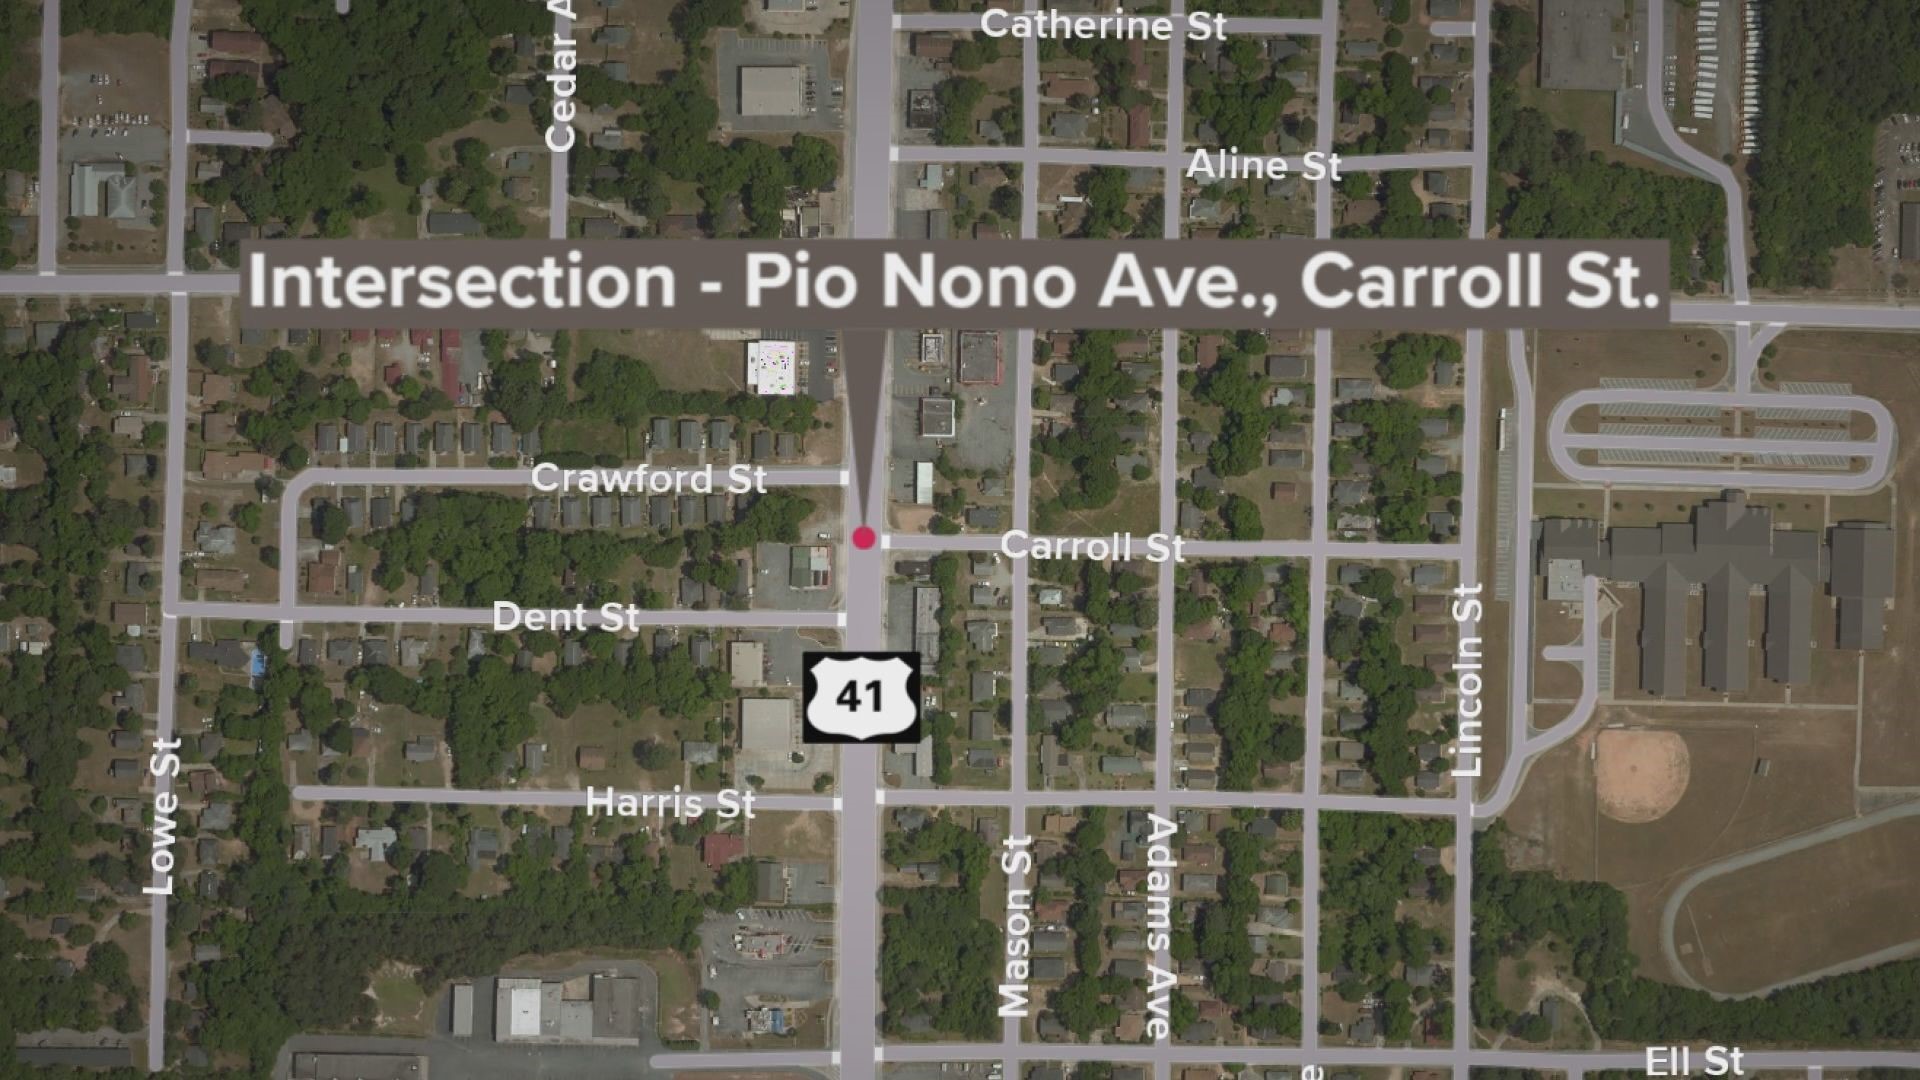 Deputies were called about a woman lying in the road at the intersection of Pio Nono Avenue and Carroll Street.